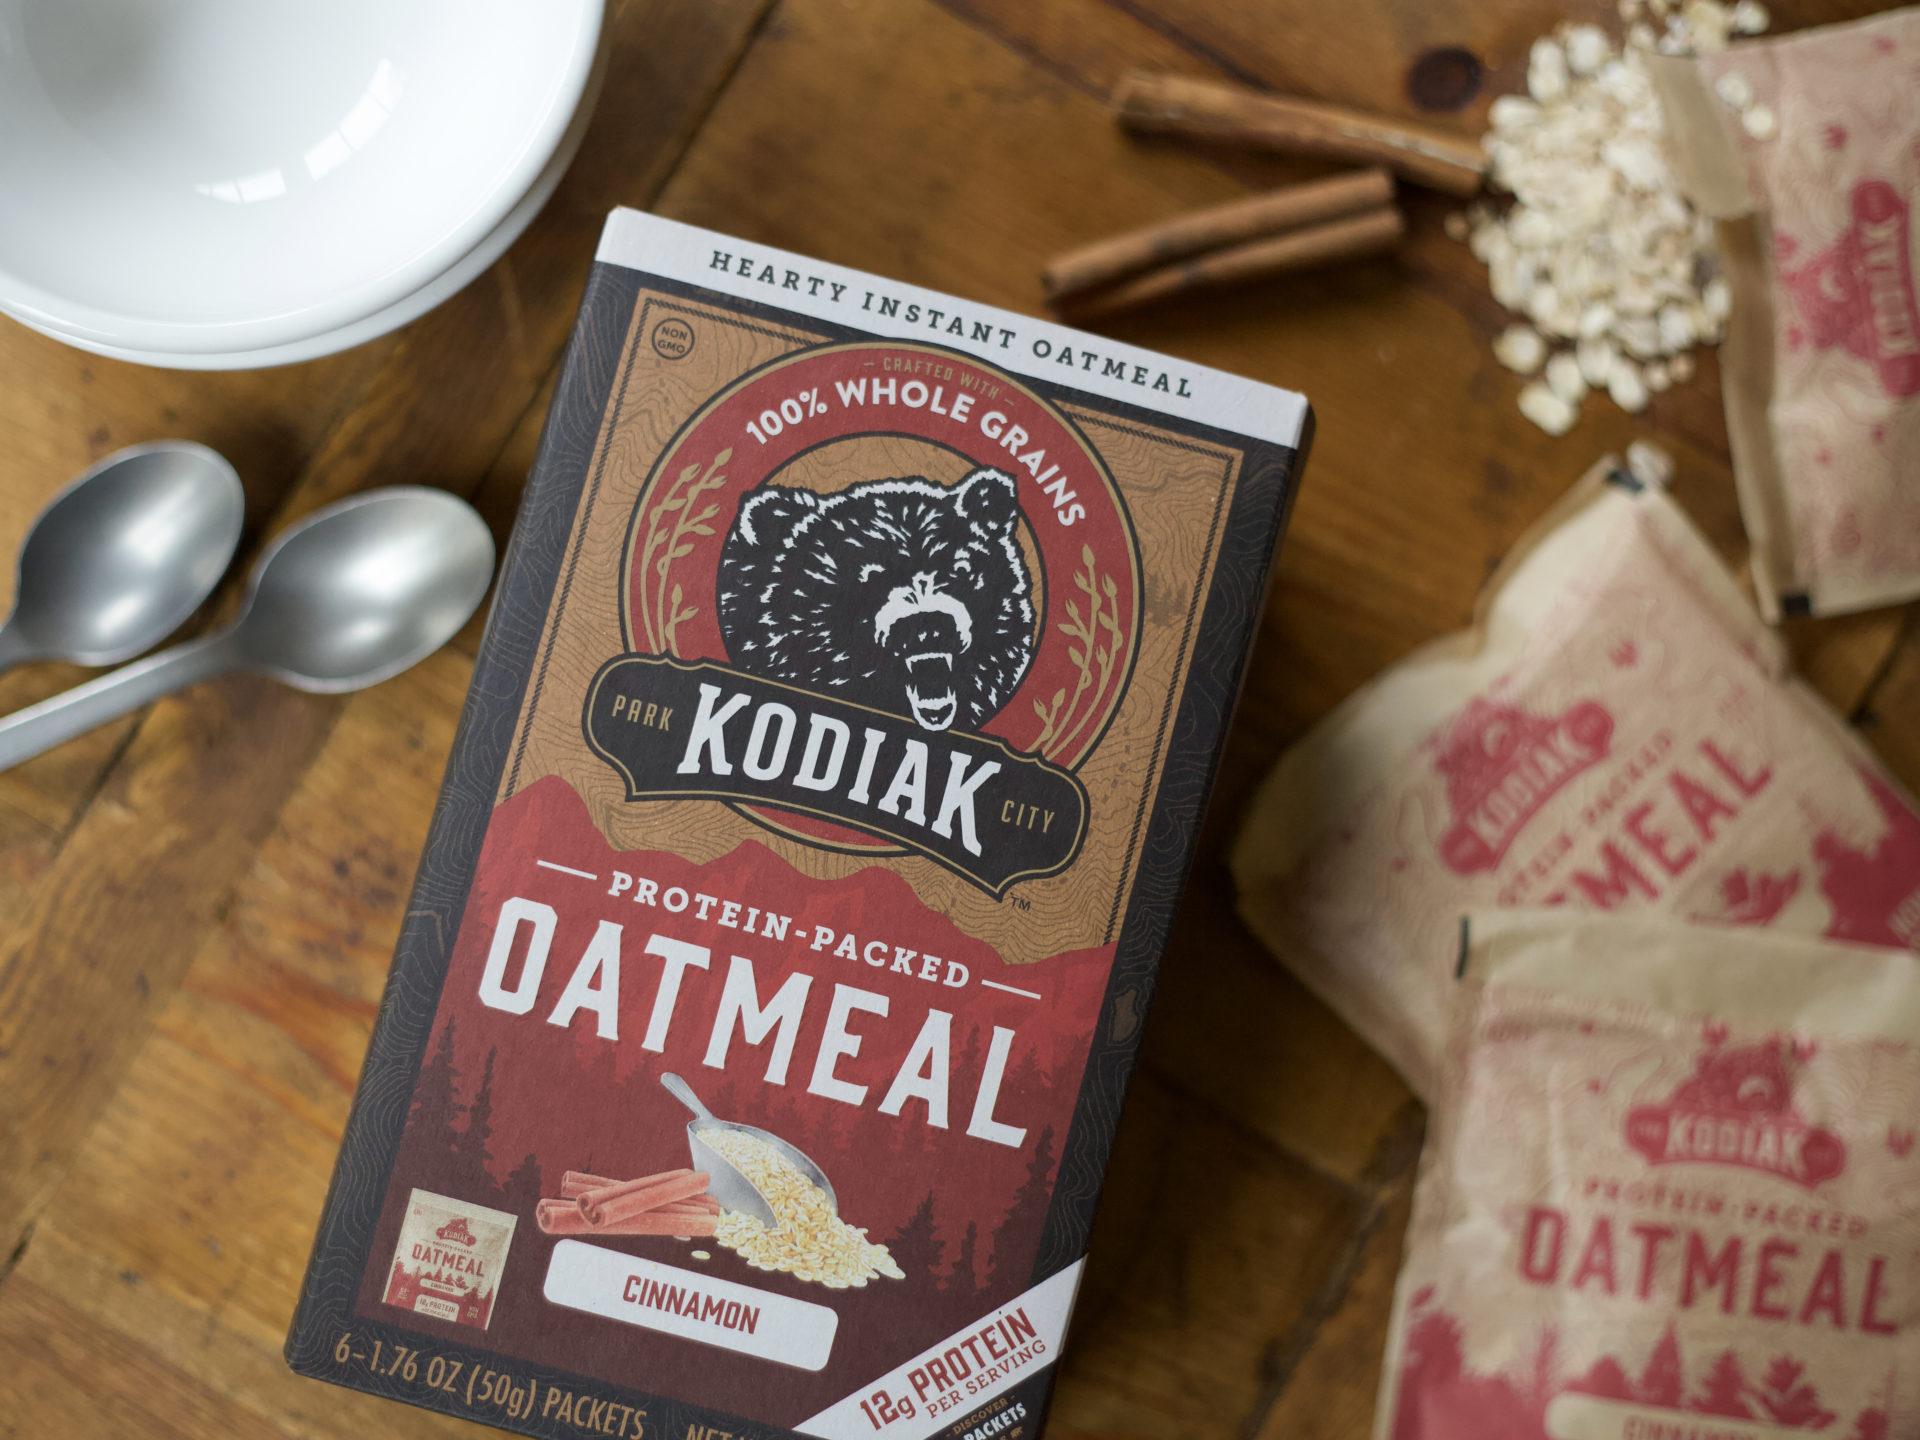 Kodiak Protein-Packed Oatmeal As Low As $3.49 At Kroger